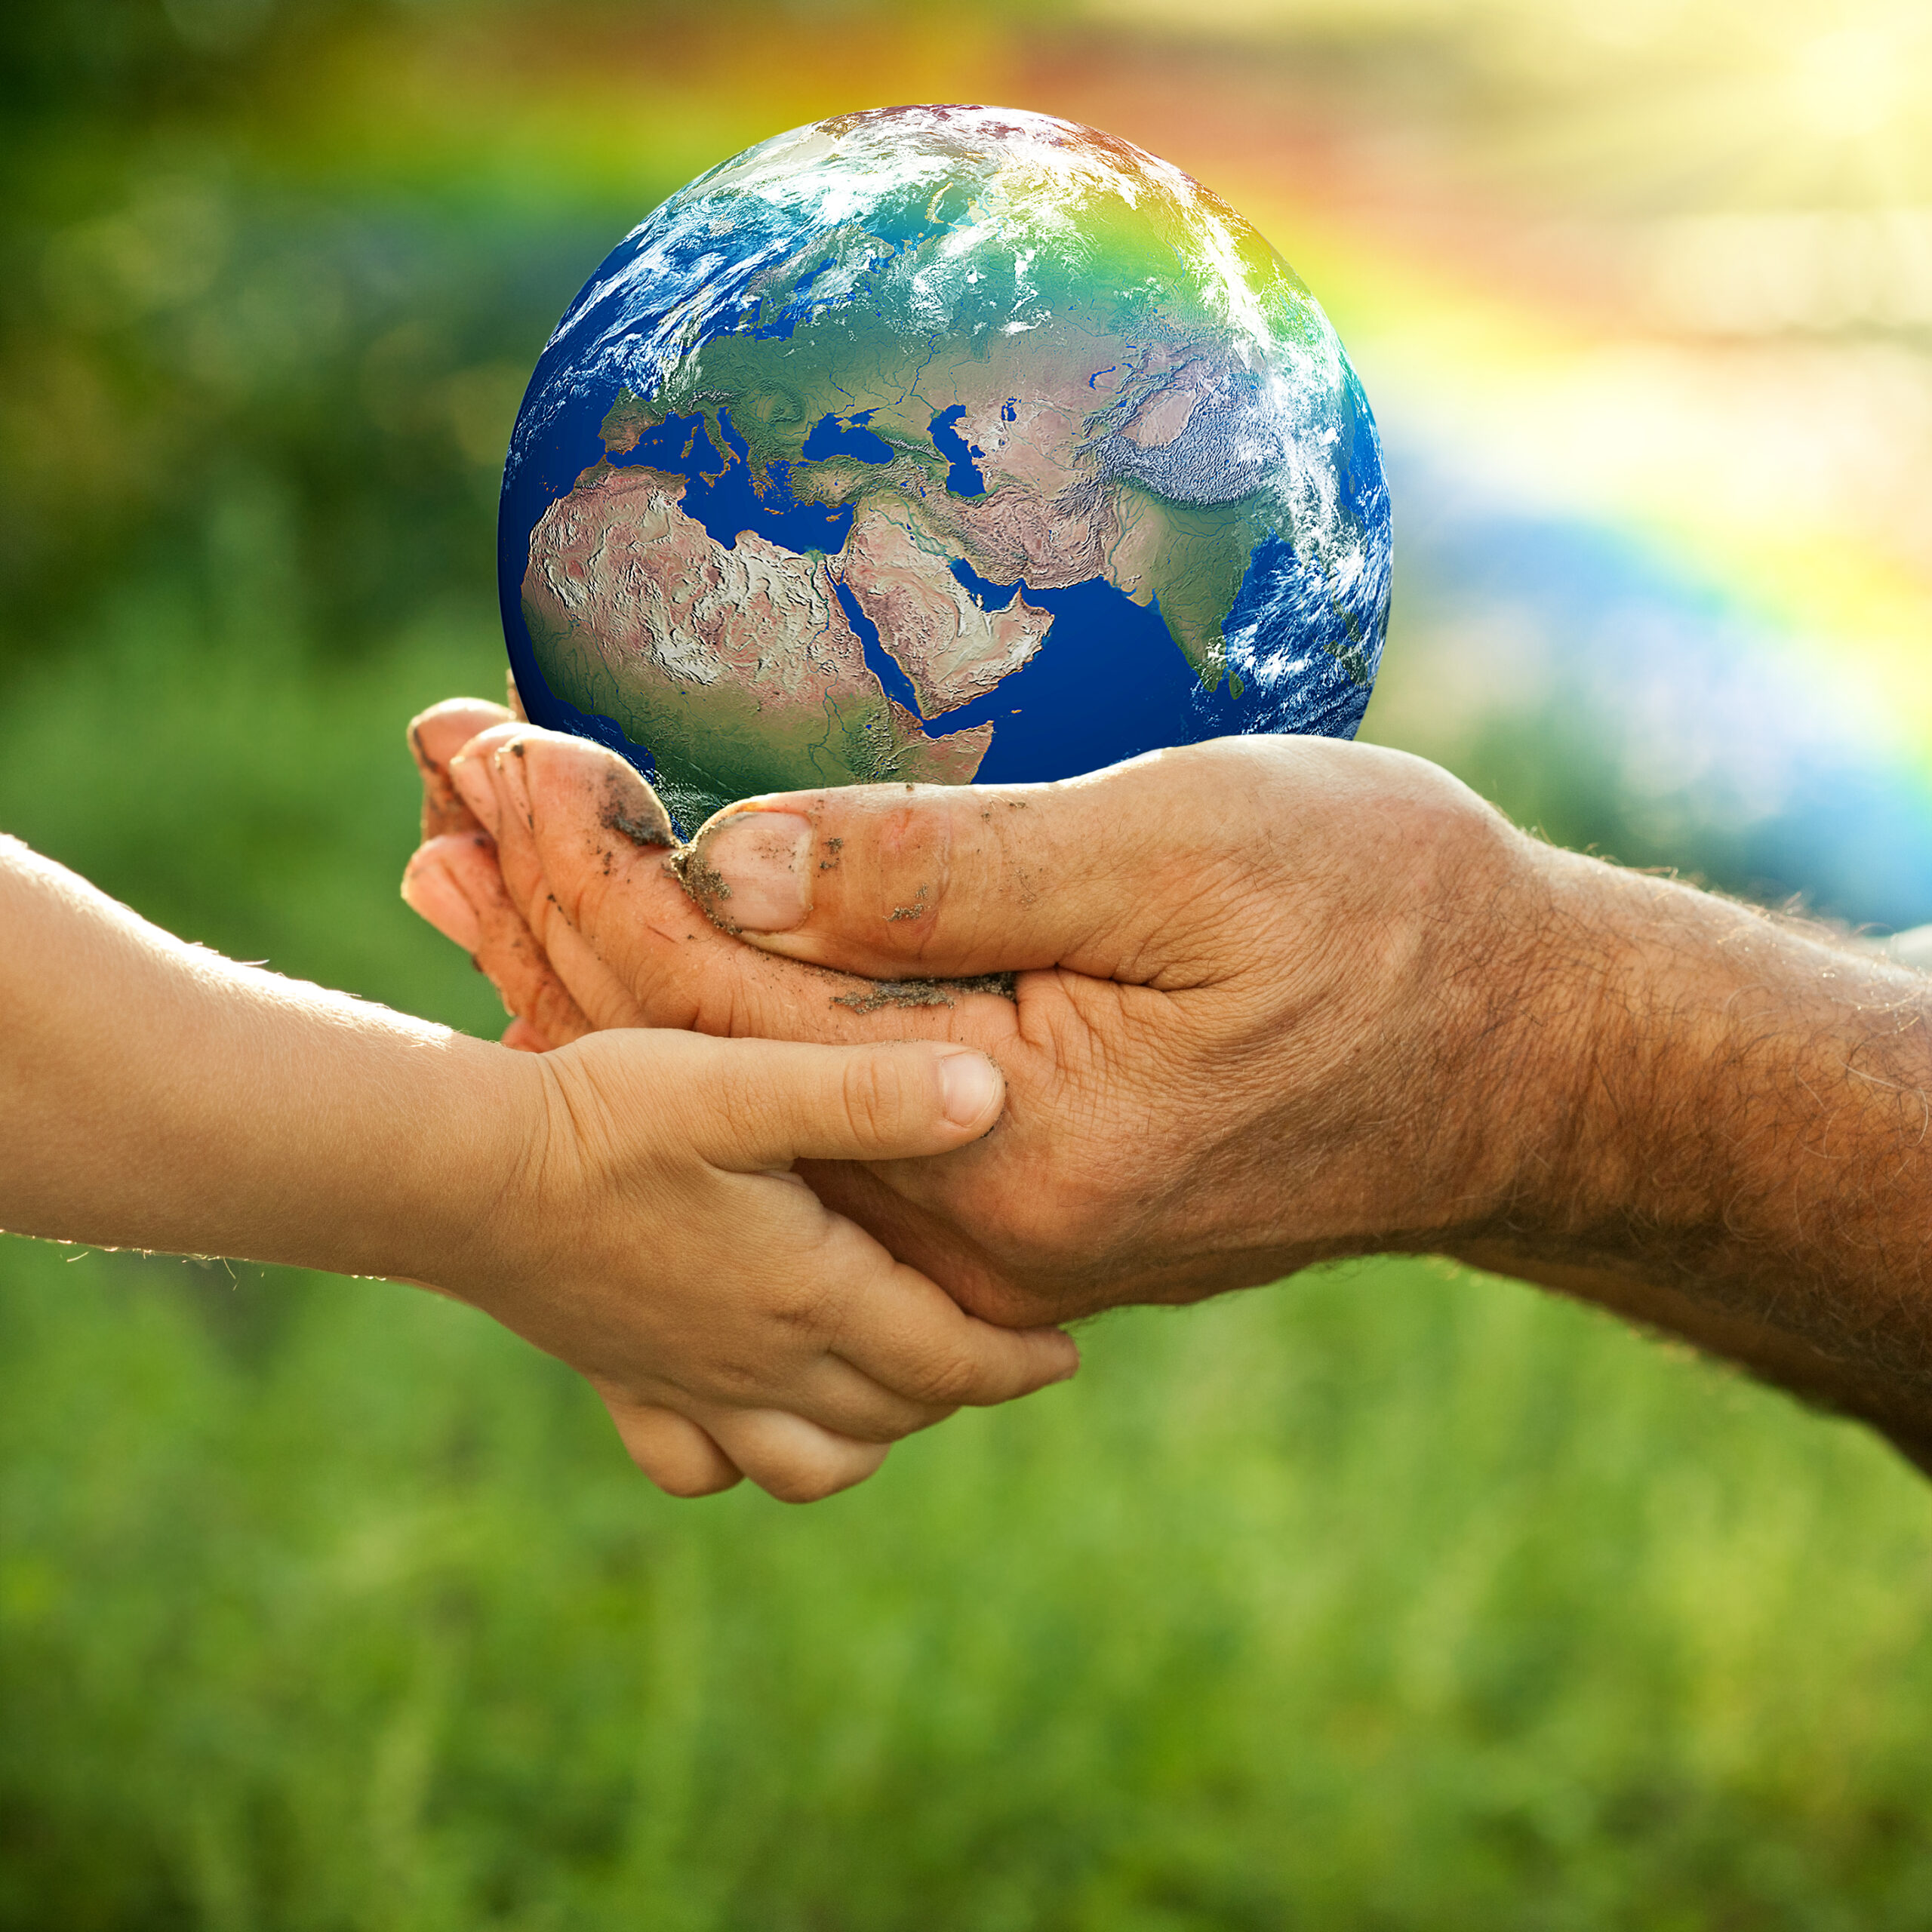 senior hands and baby hands holding Earth_iStock-155920904